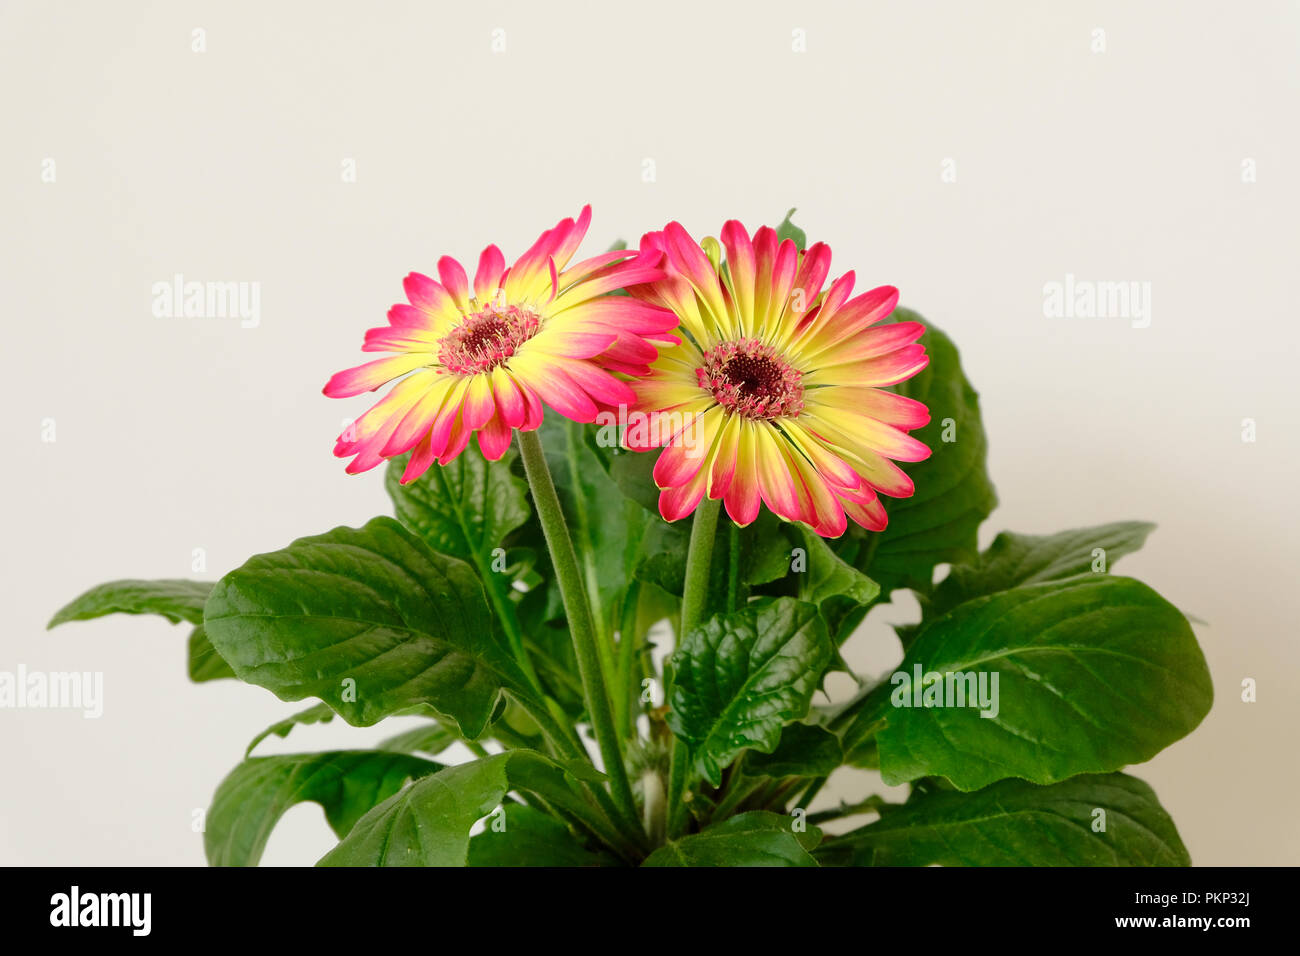 Deep pink and yellow Gerbera flowers against plain white background Stock Photo